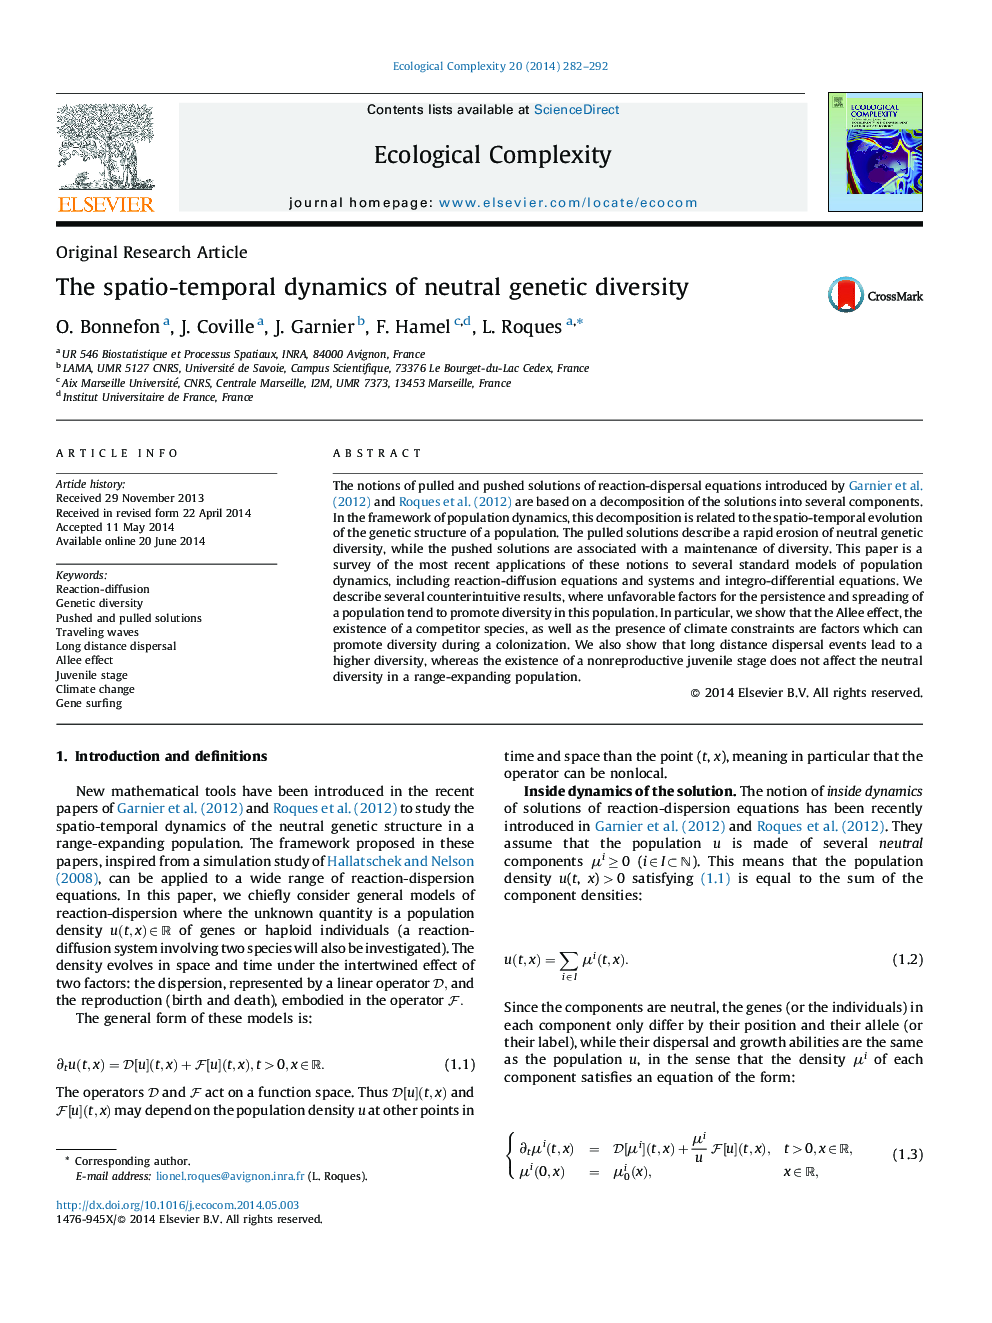 The spatio-temporal dynamics of neutral genetic diversity